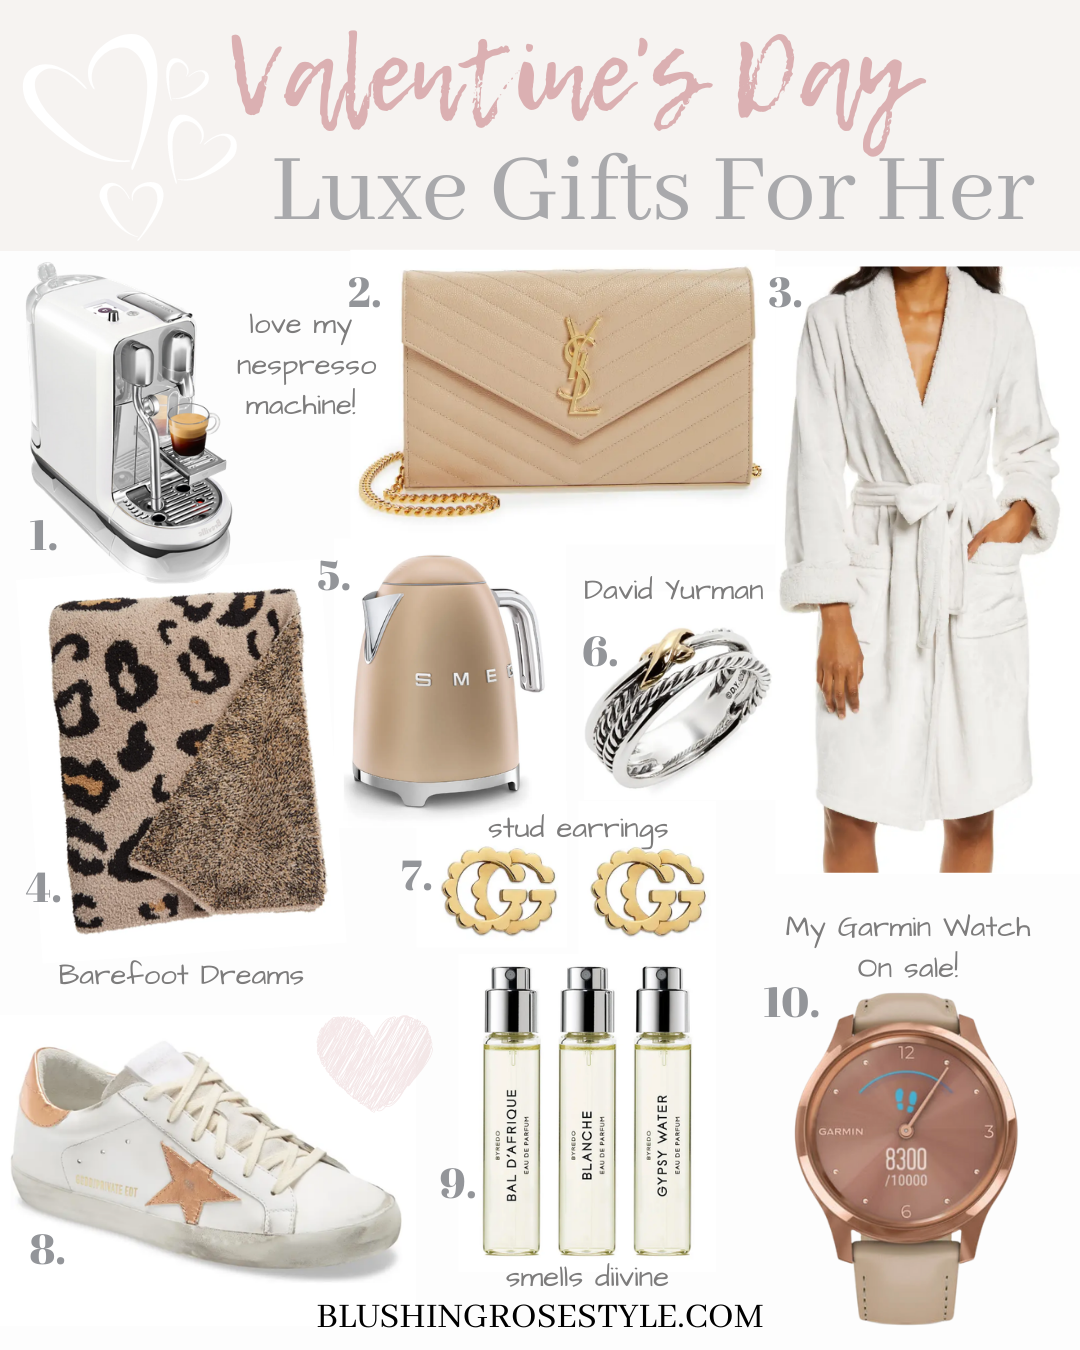 luxe valentine's day gifts for her